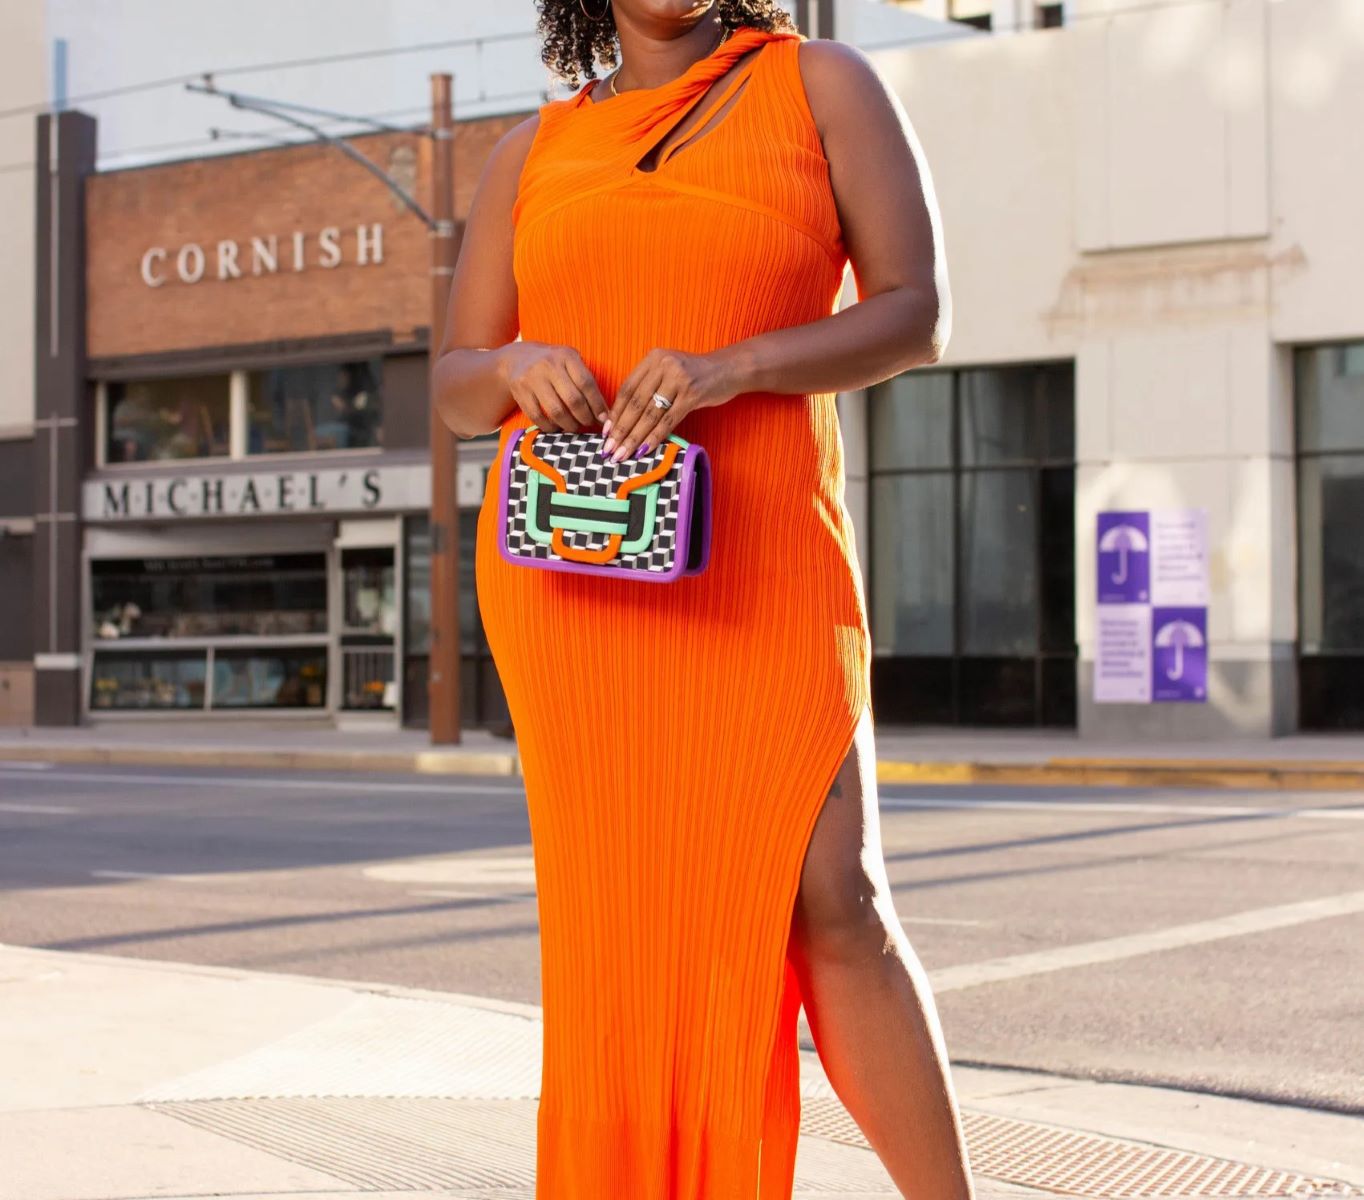 10 Stylish Shoe Options To Pair With An Orange Dress